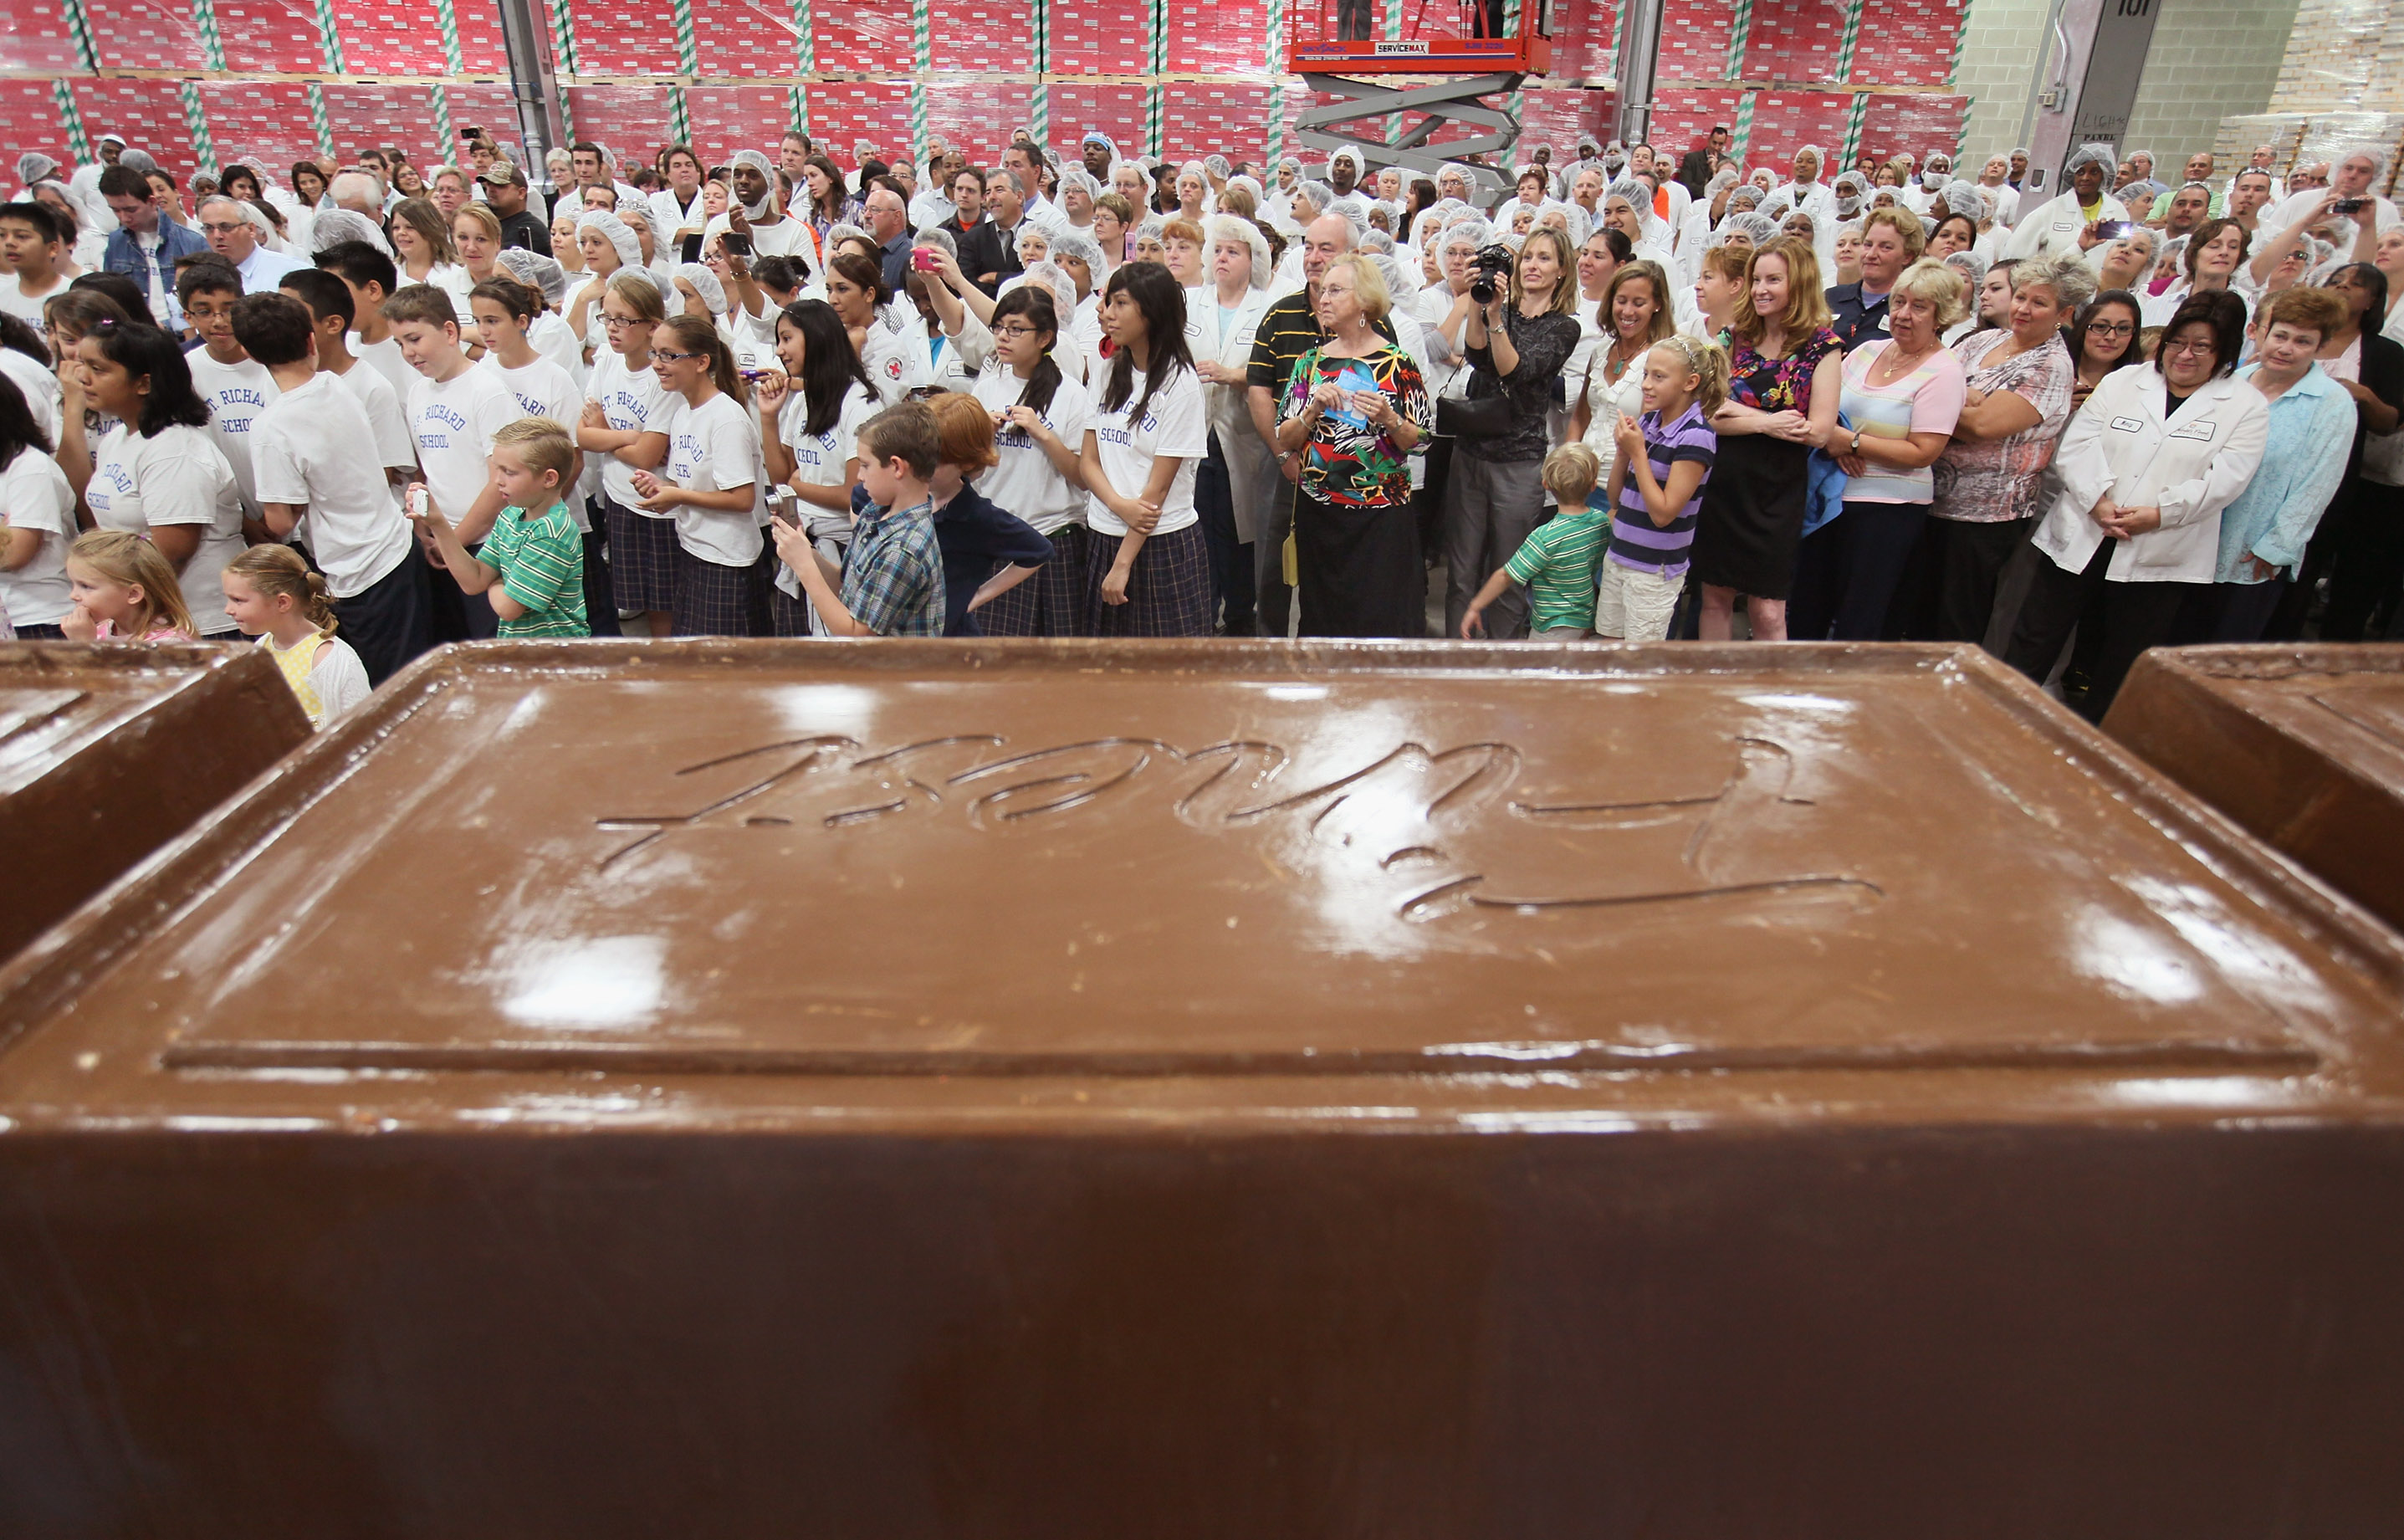 You Can Eat Chocolate Only If You Get More Than 10 on This Quiz Guinness World Record Attempt At Largest Chocolate Bar